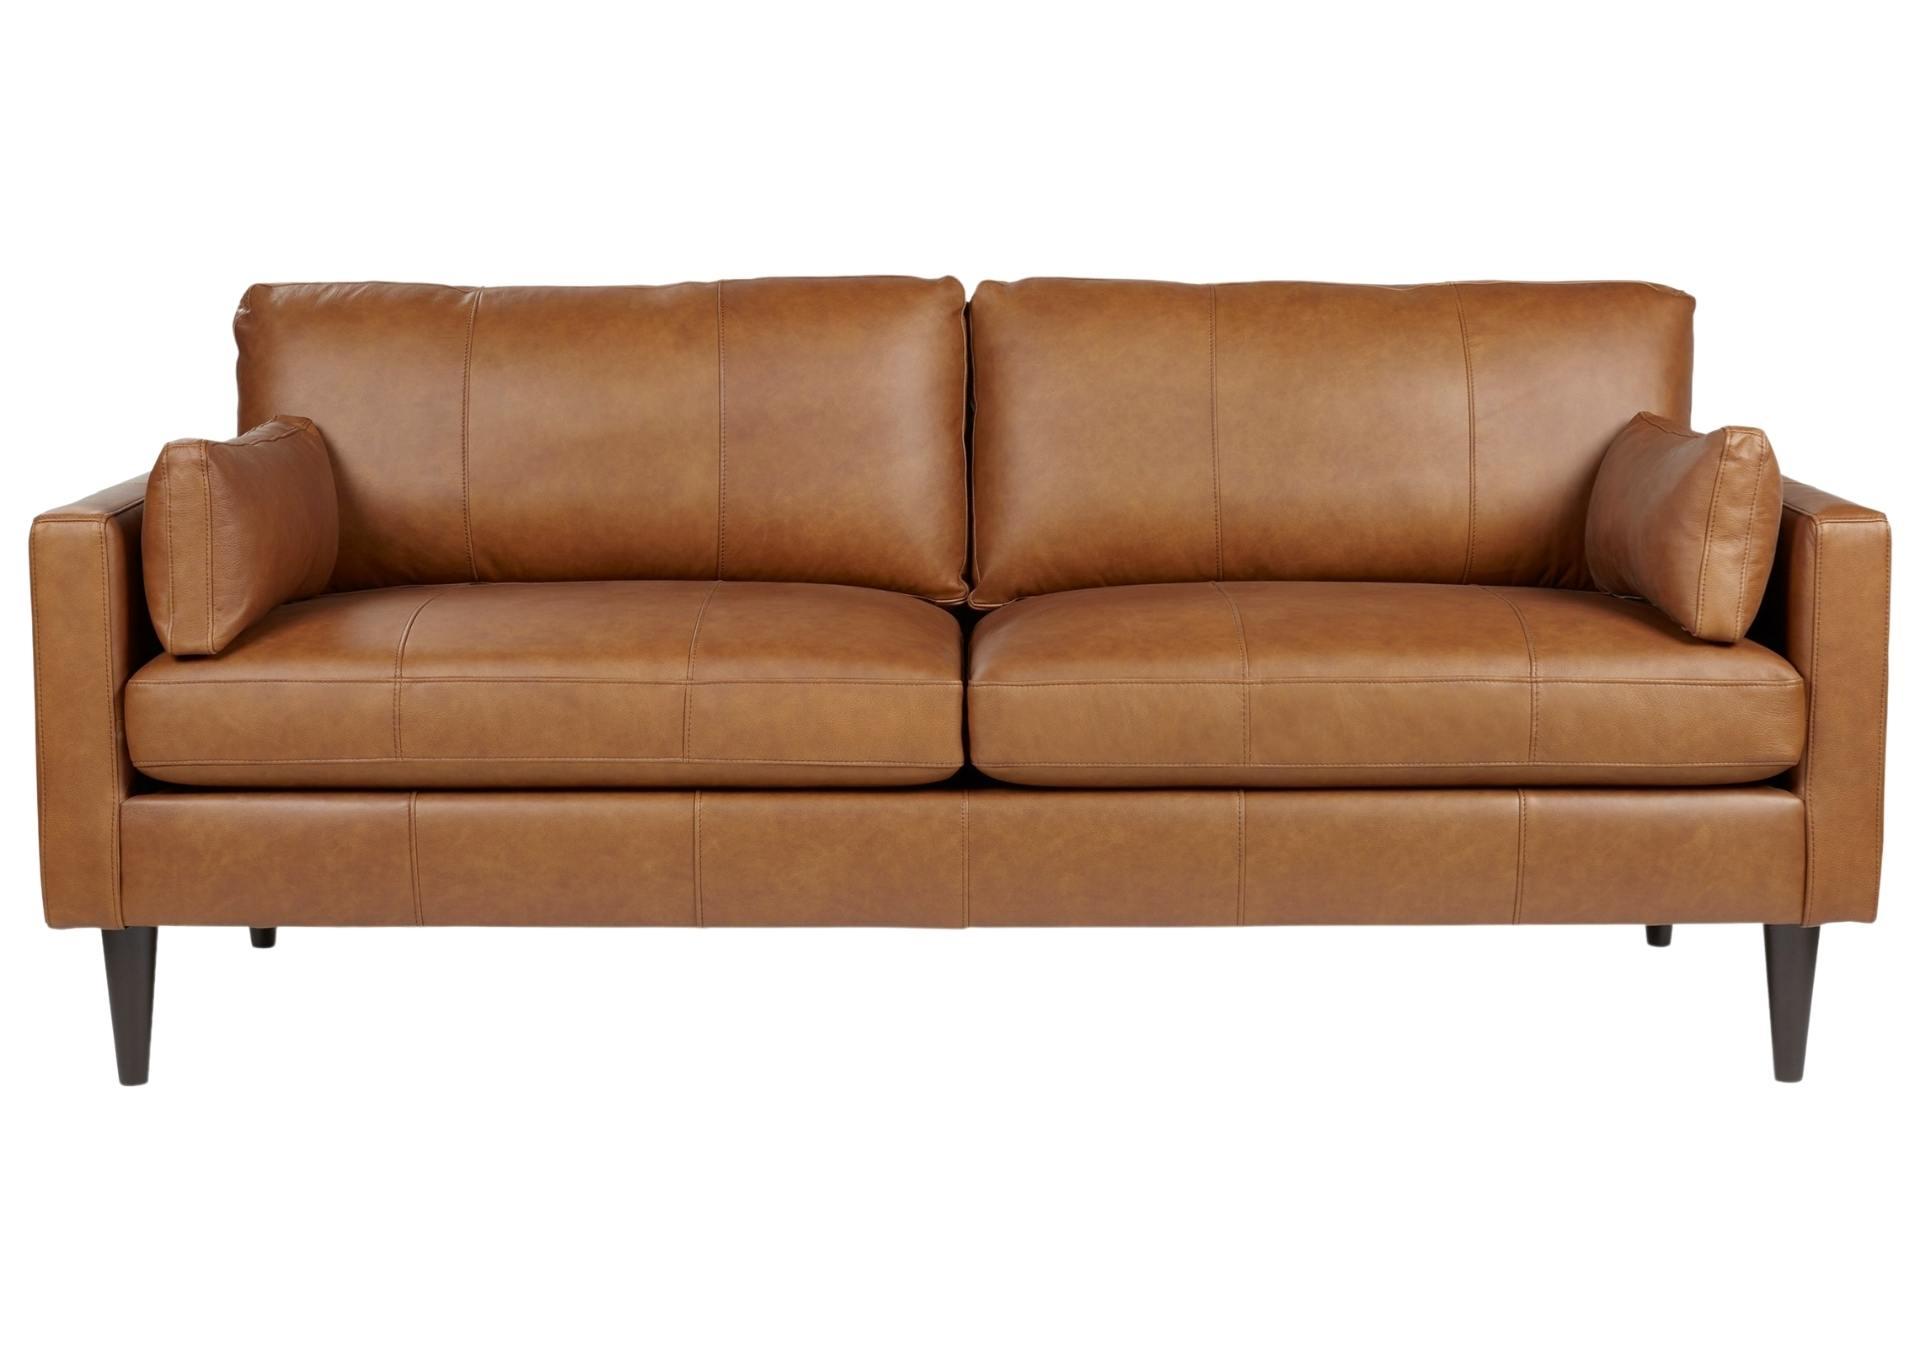 TRAFTON RUST LEATHER SOFA,BEST CHAIRS INC